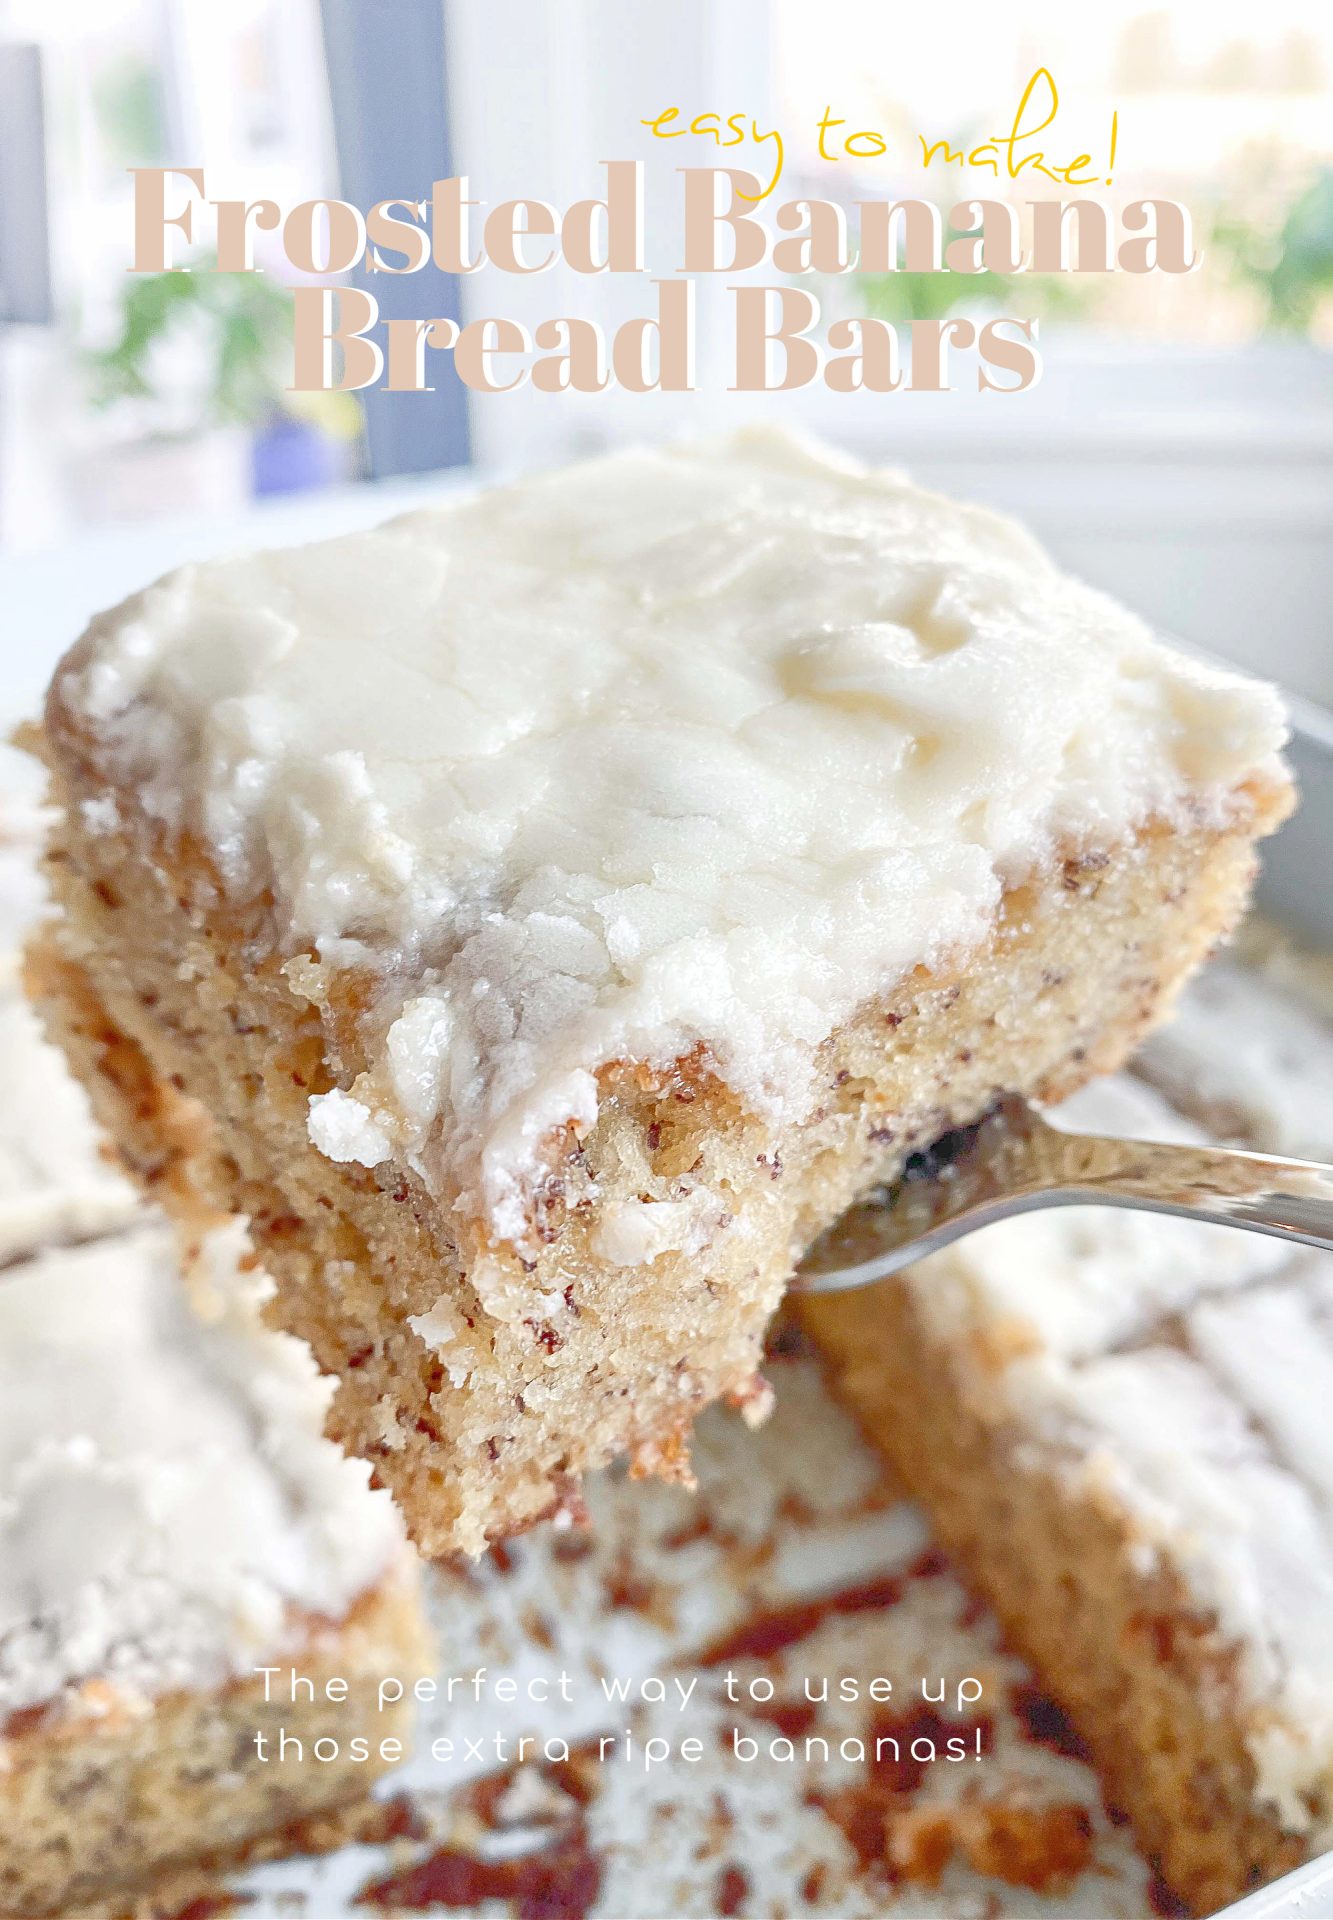 frosted banana bread bars, baking, bananas, easy to bake, what to do with extra ripe bananas, frosting, moist banana bread, banana bread recipe, banana bar recipe, banana dessert, banana recipes, breakfast ideas